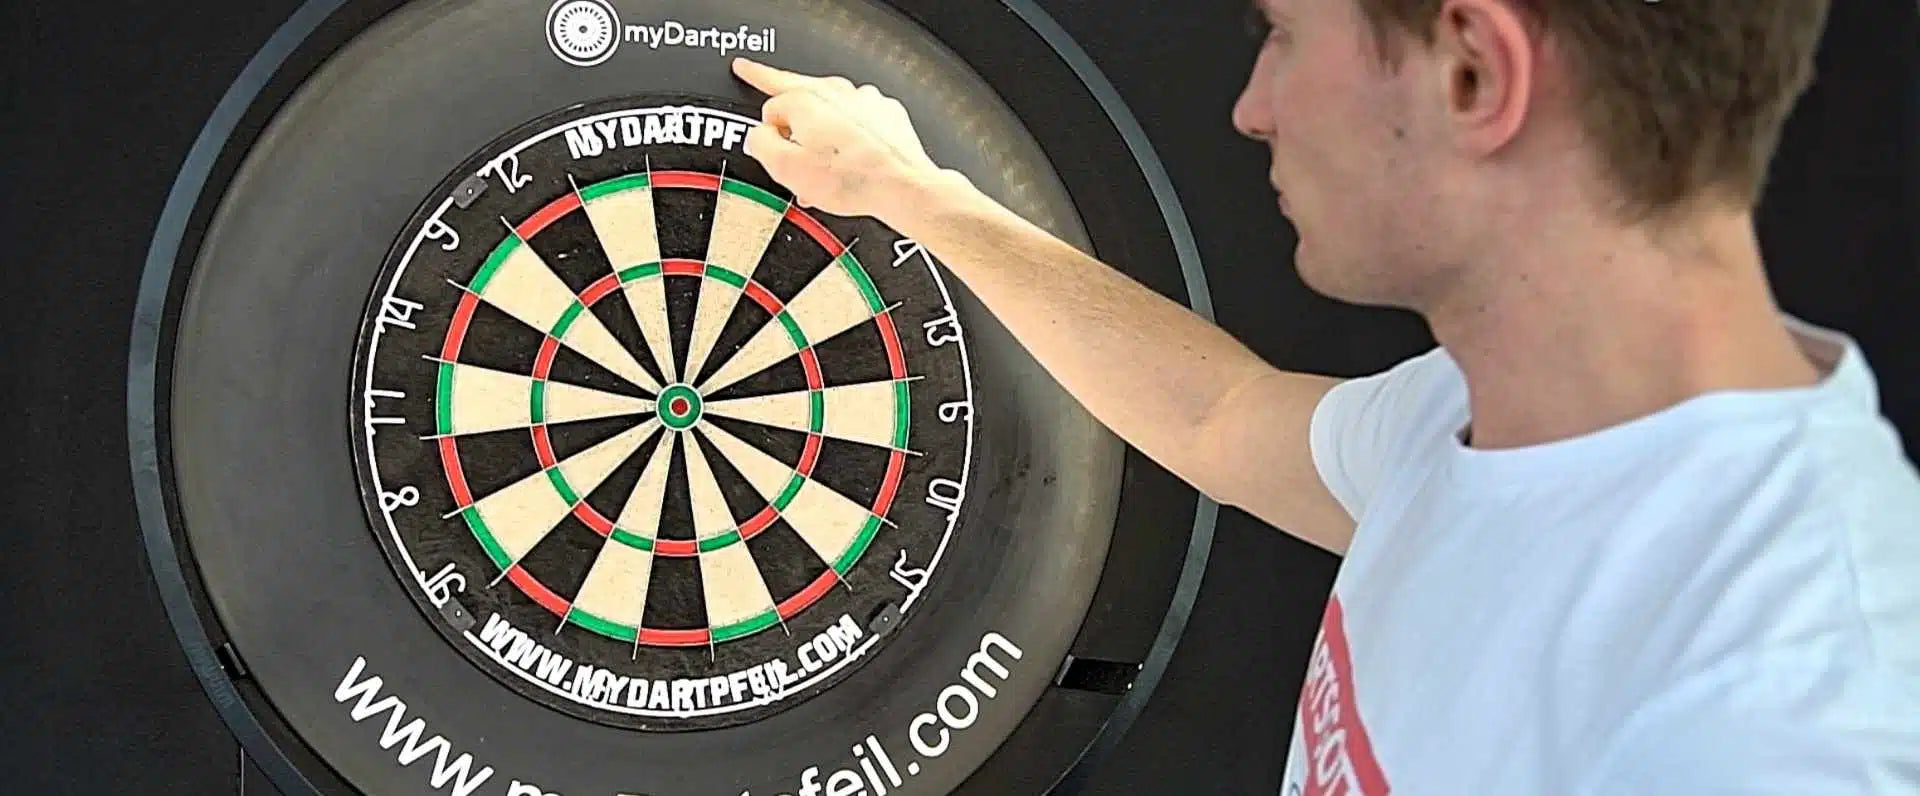 Insulate the dartboard and avoid trouble: Here's how it works 🎯